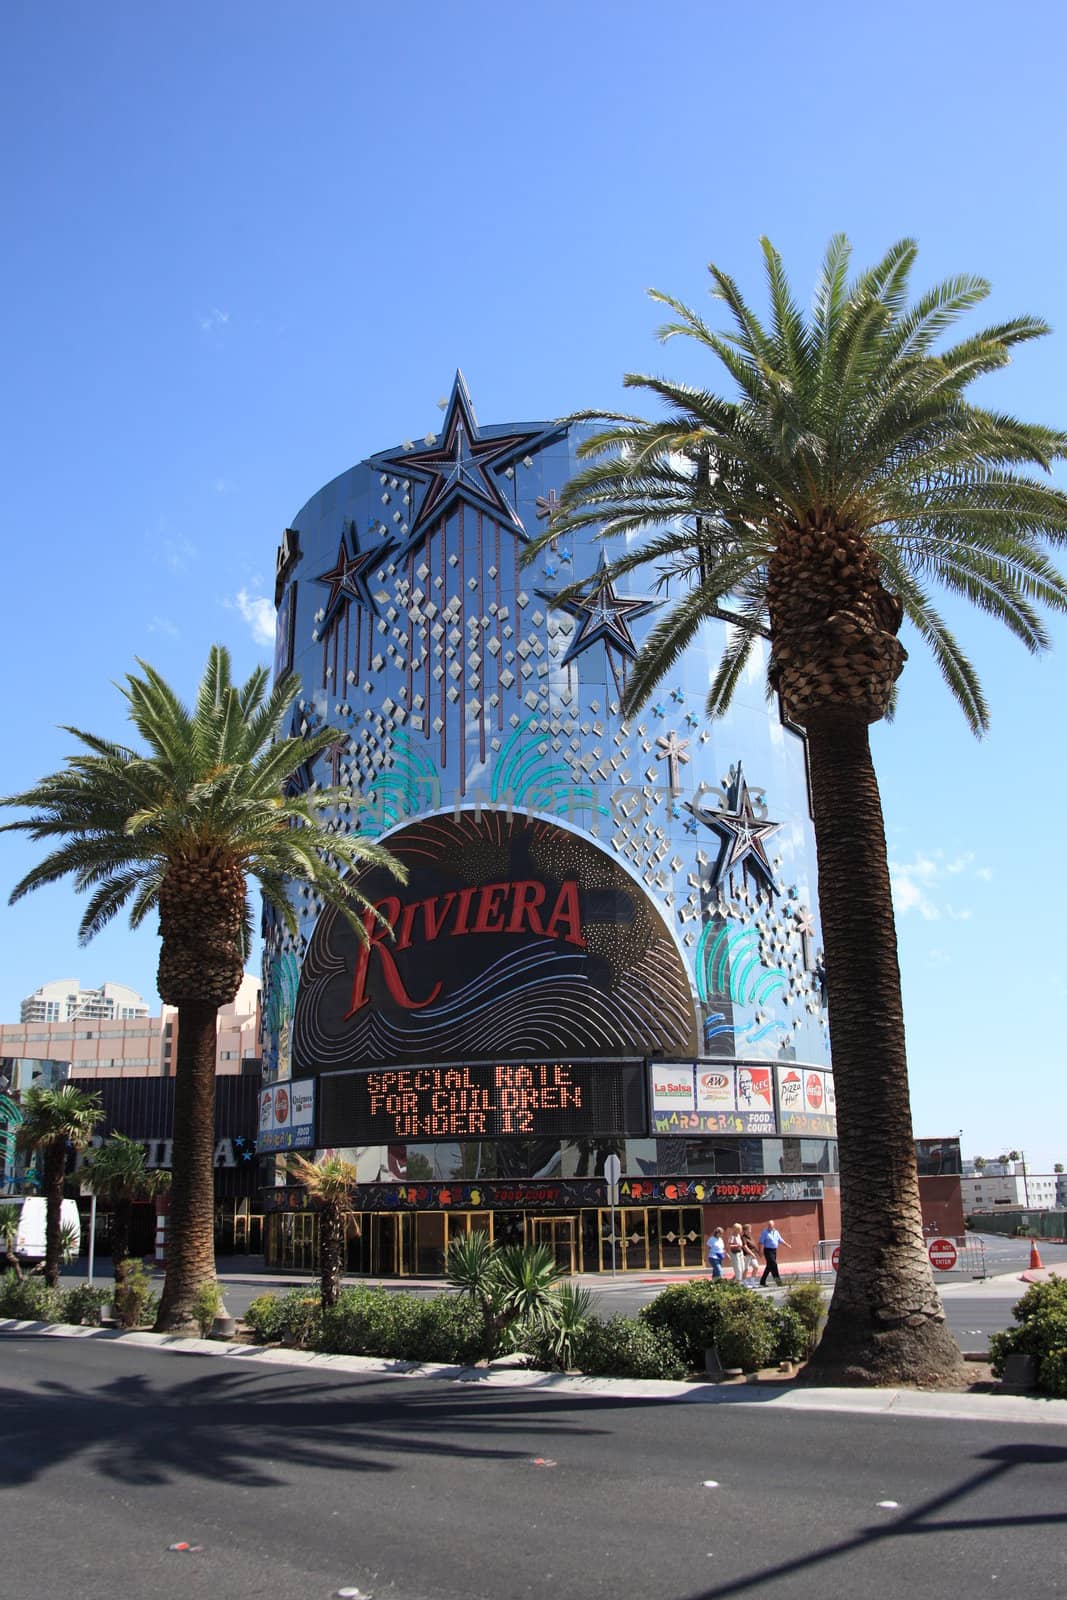 Las Vegas - Riviera Hotel by Ffooter